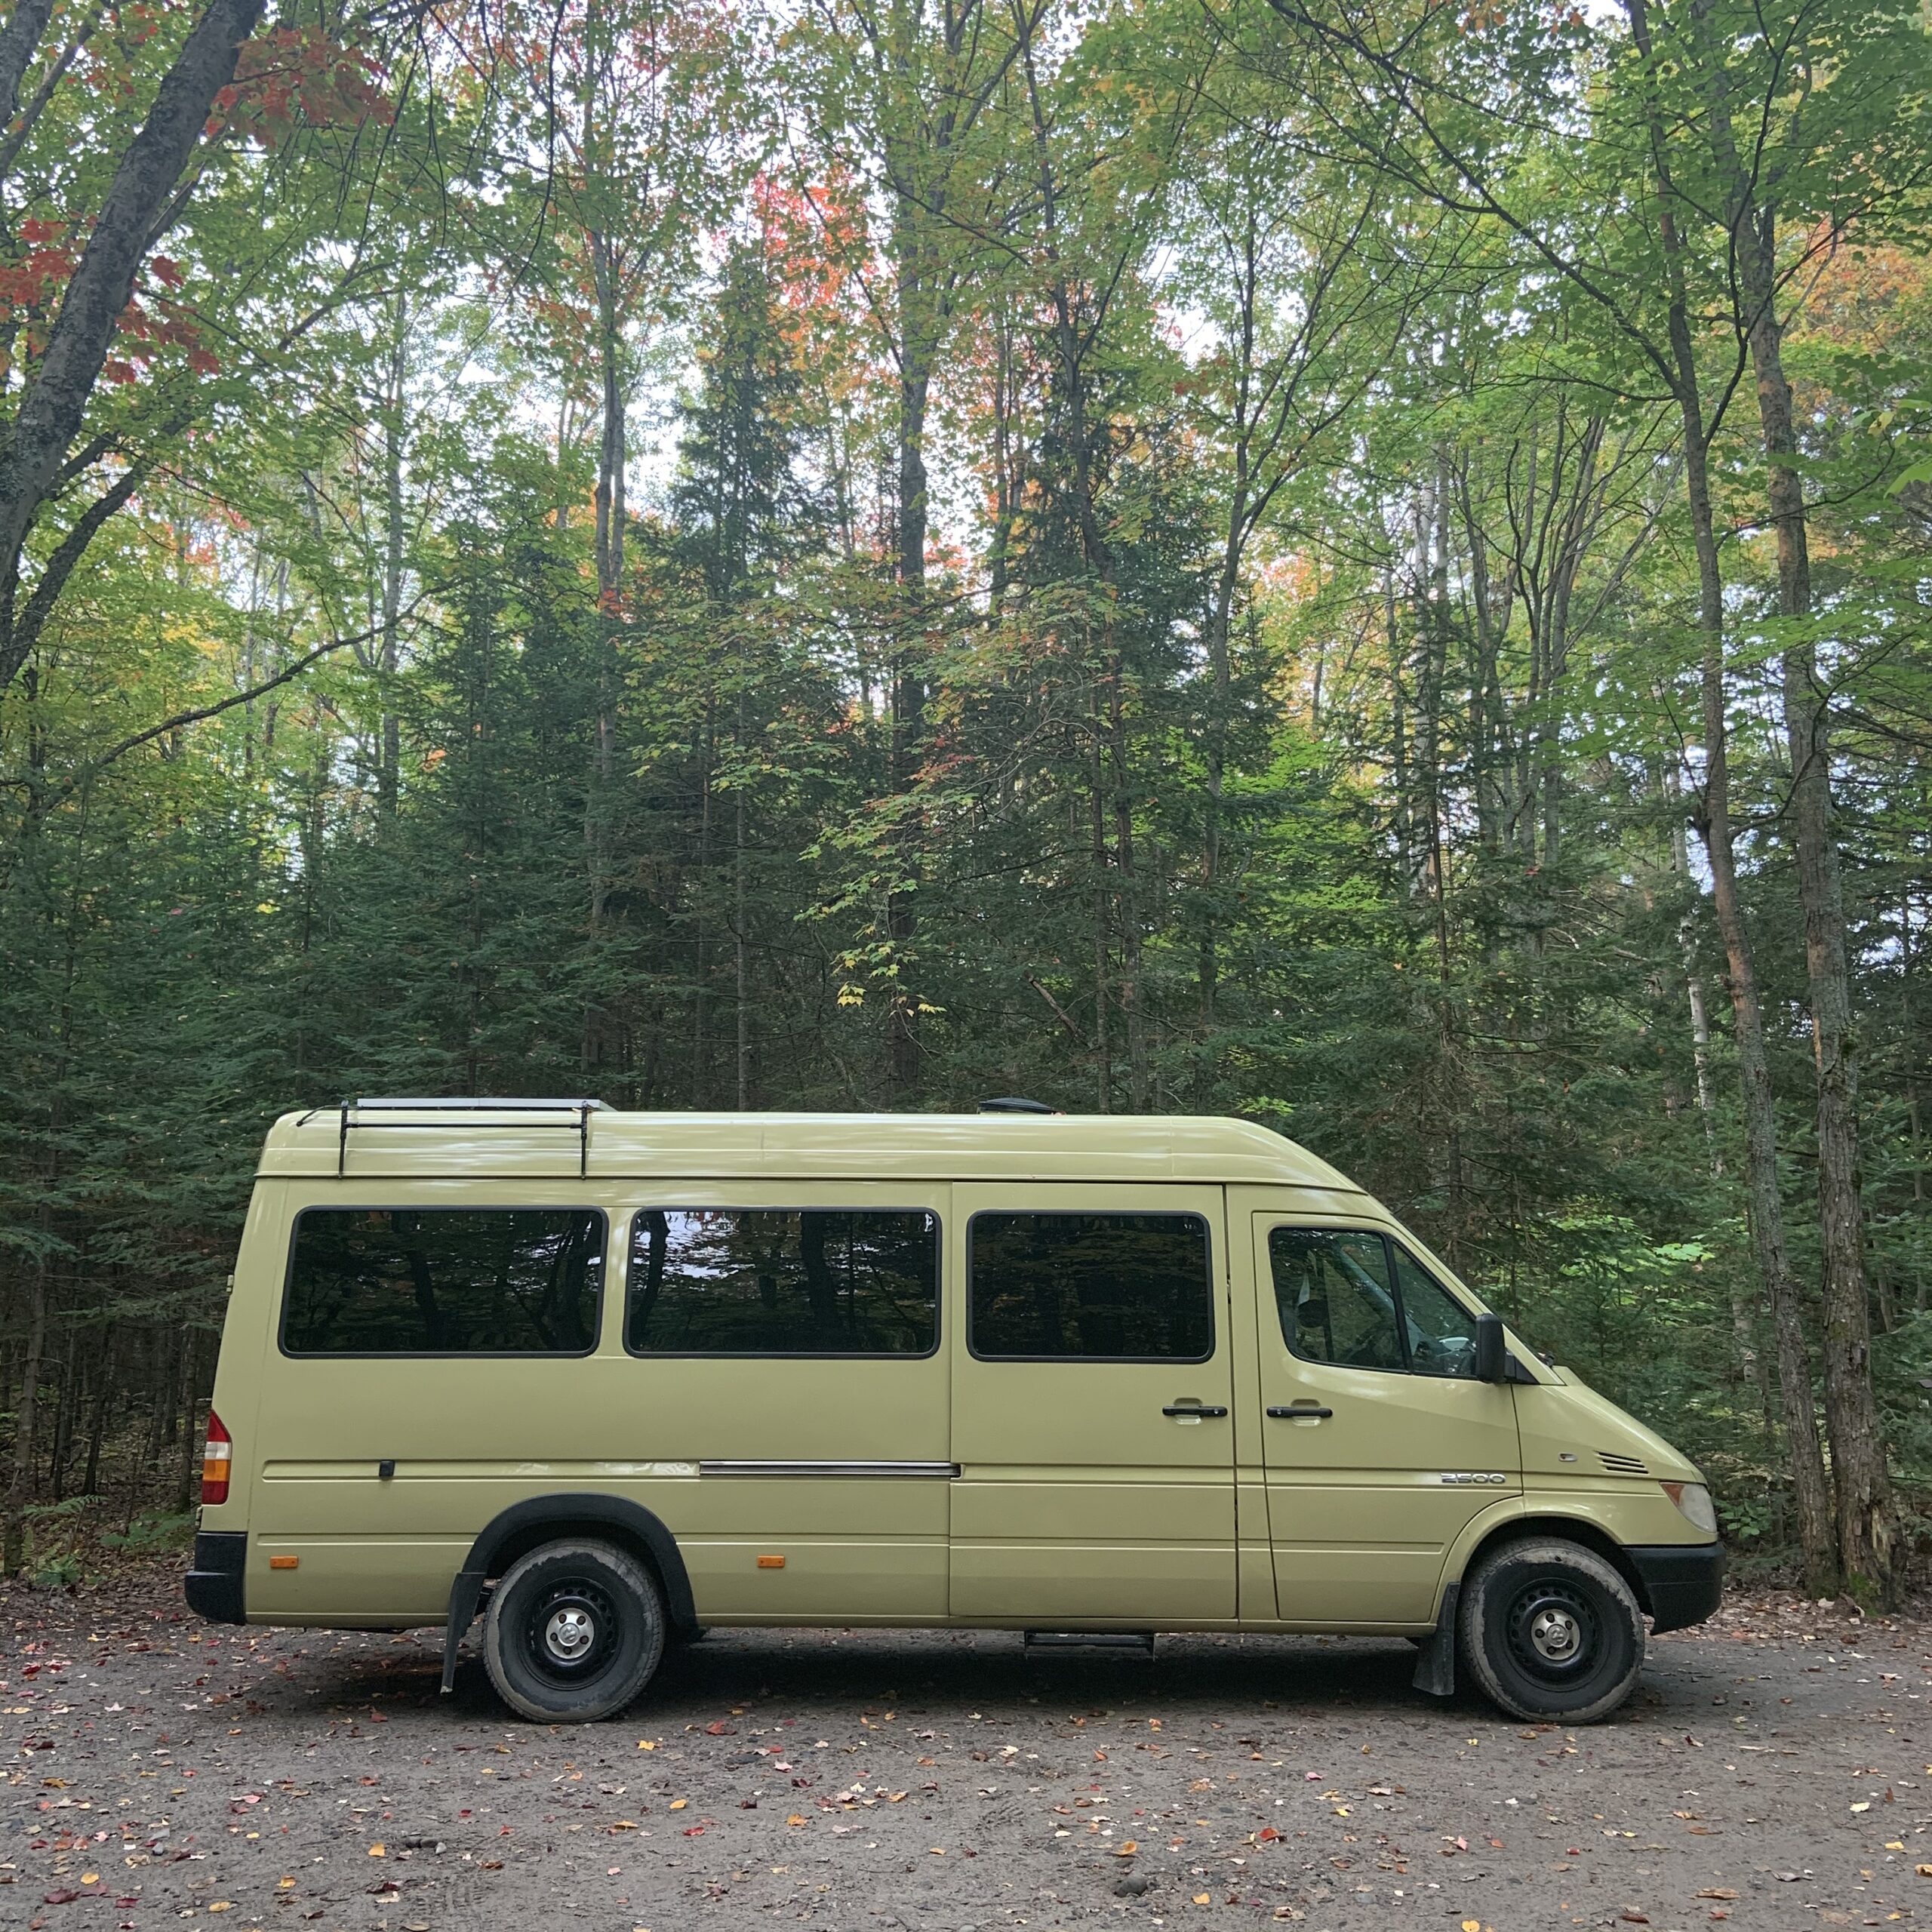 The Van, Sitting in a forest